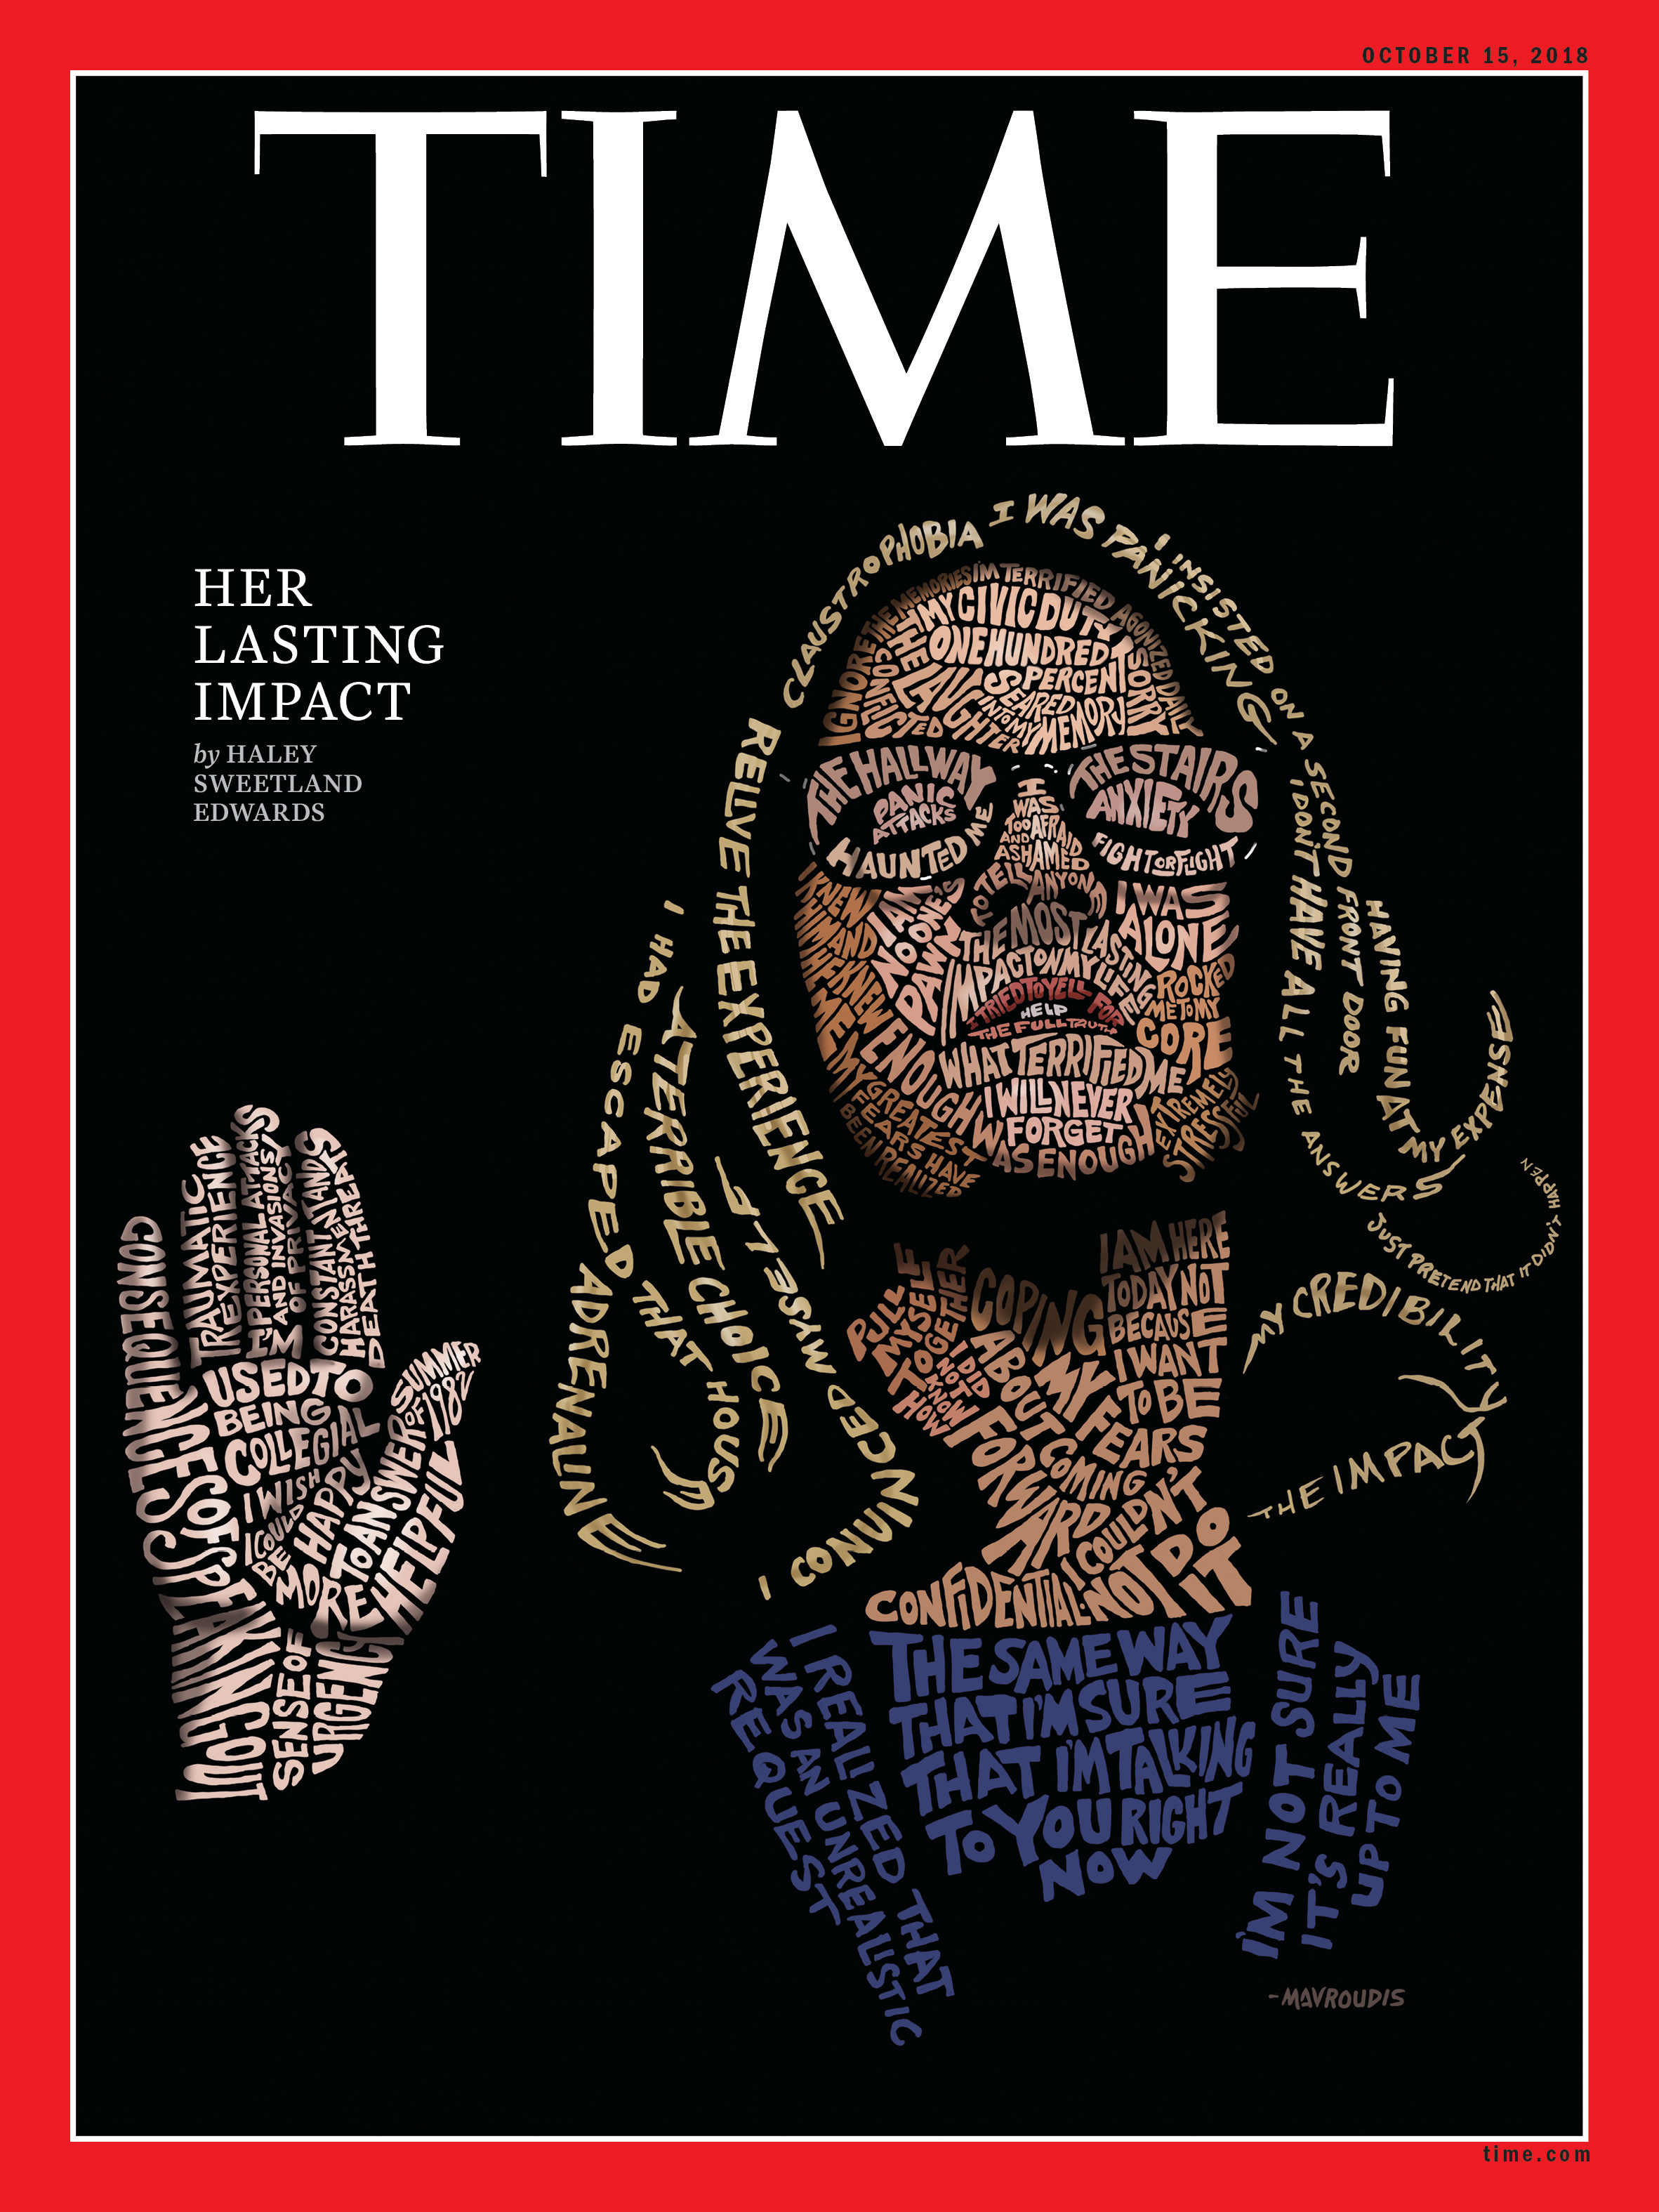 The impact of sexual assault survivors' words: Time magazine cover image